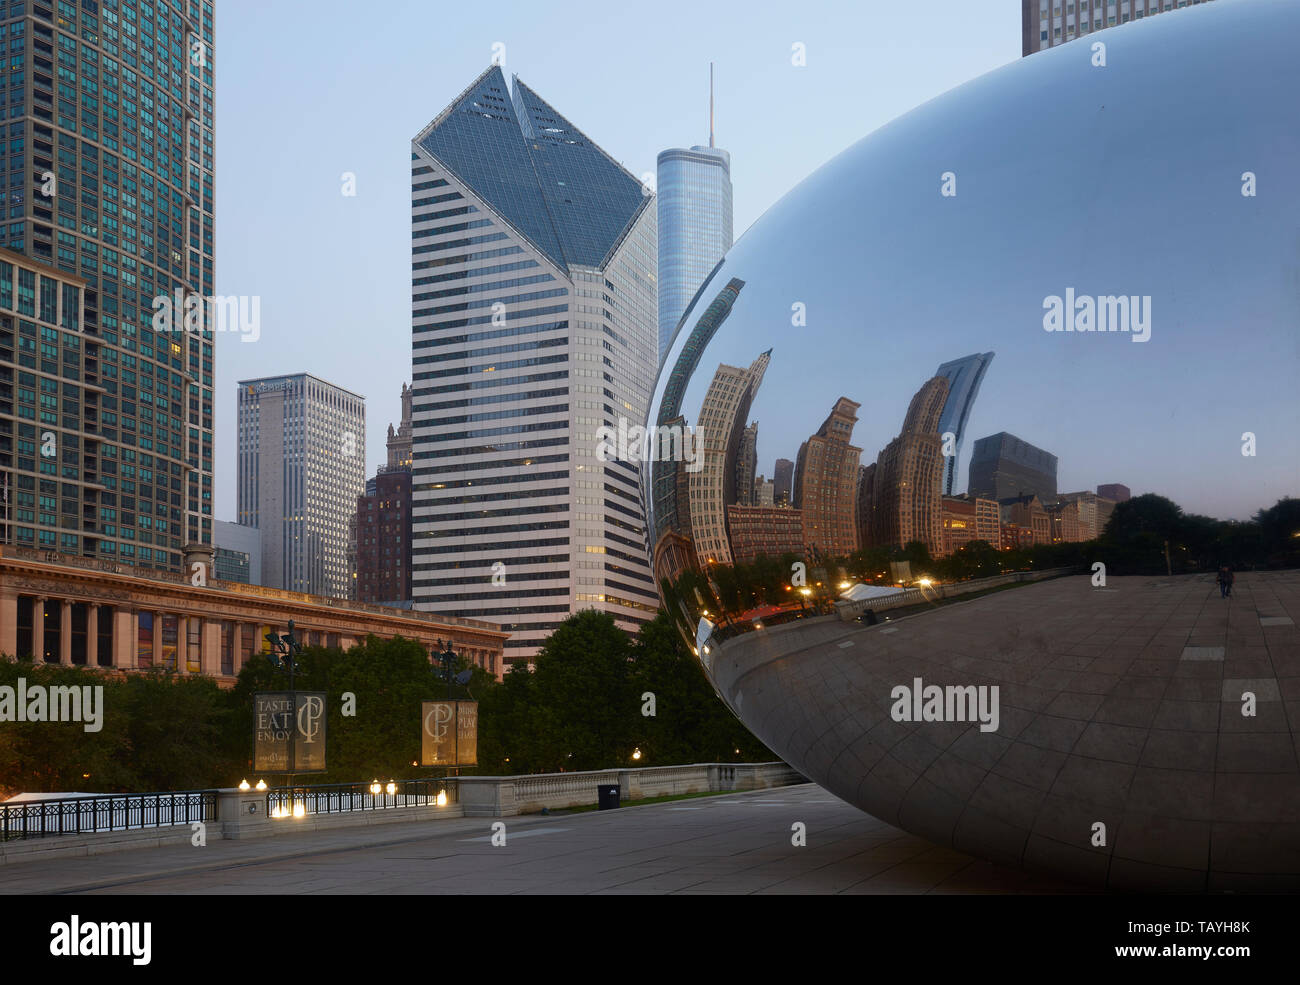 The sculpture Cloud Gate, also known as the Bean, at Millenium Park, Chicago, Illinois, United states Stock Photo